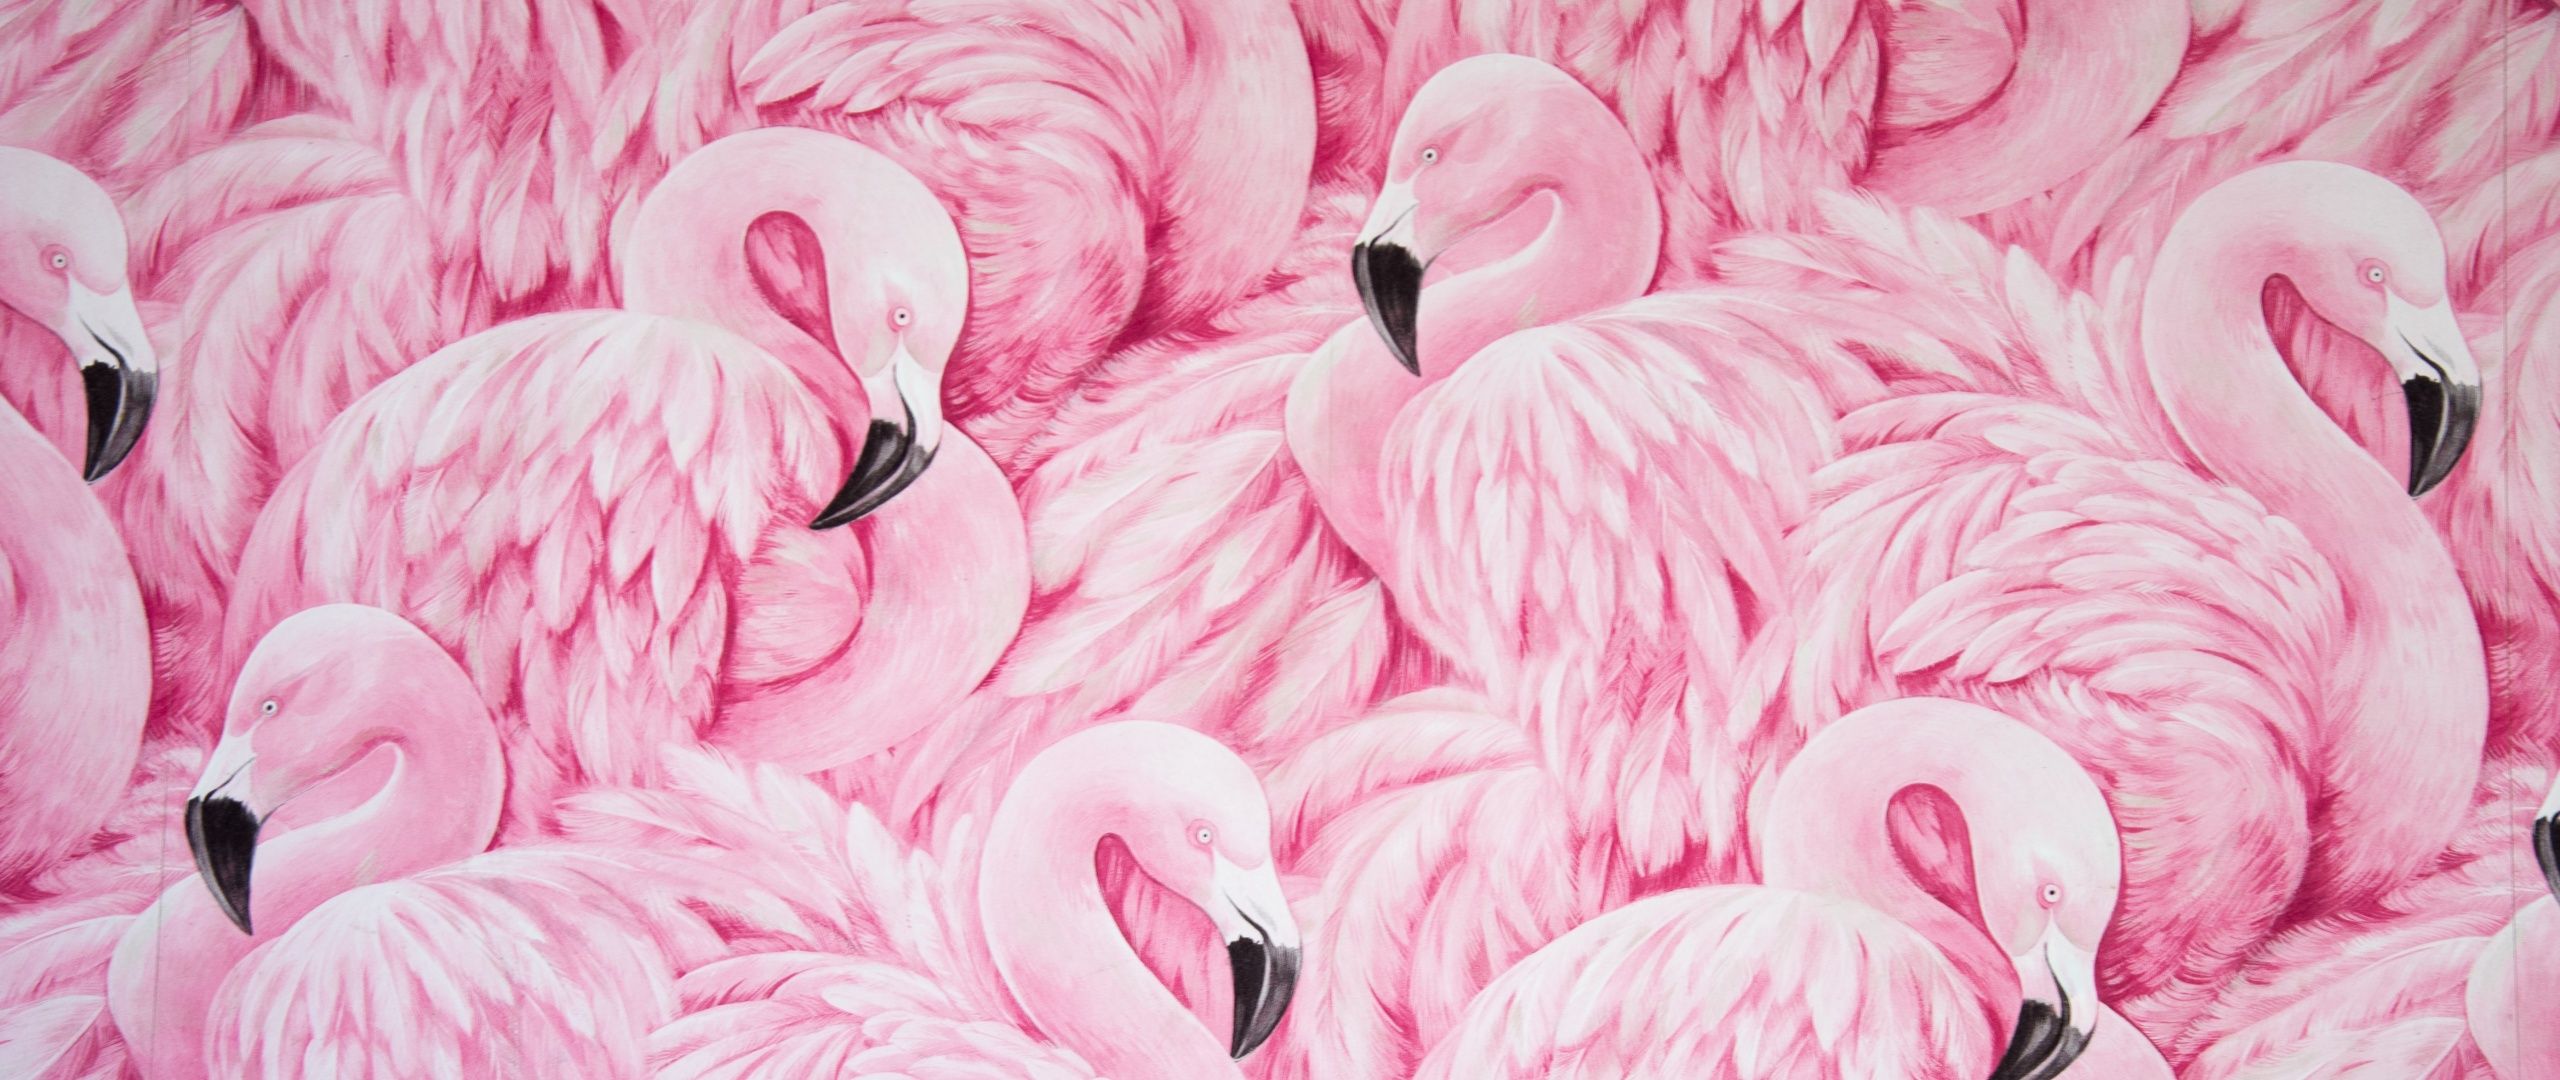 Pink Flamingos Wallpaper 4K, Painting, Feathers, Animals